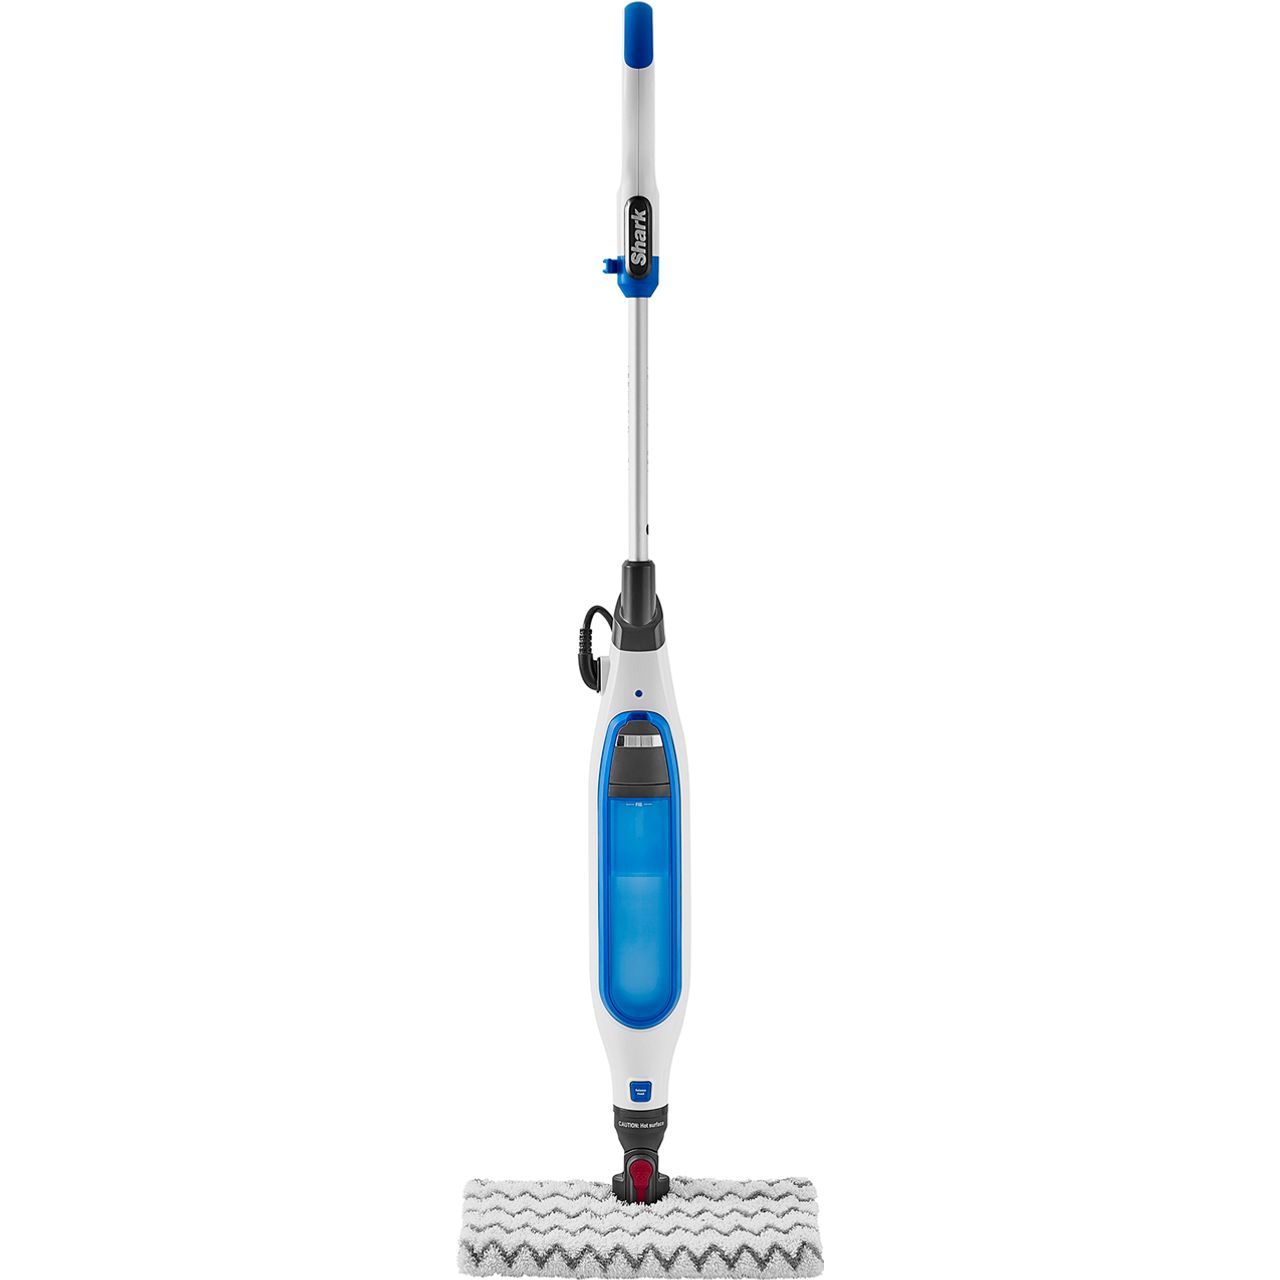 Shark Klik n’ Flip S6001UK Steam Mop with up to 15 Minutes Run Time Review